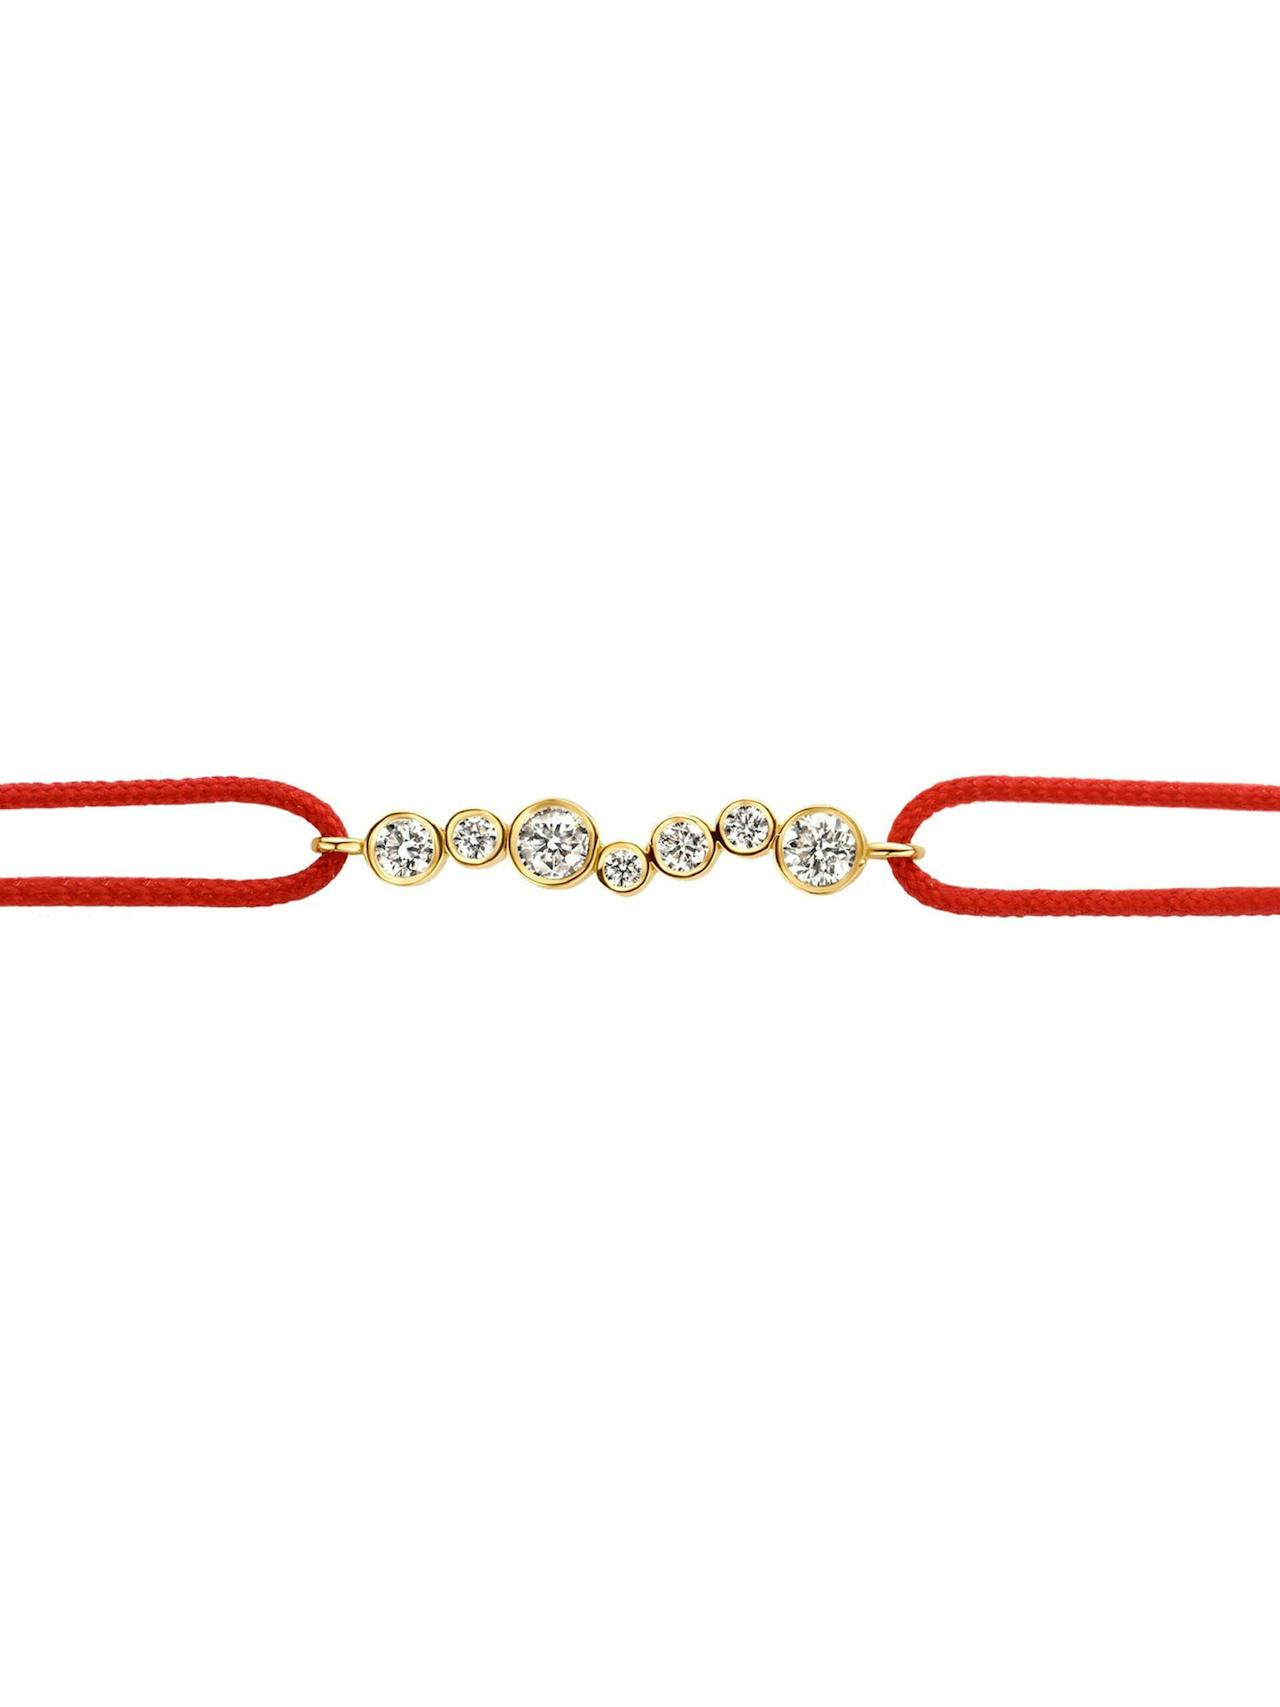 The looped cord bracelet featuring a sliding knot tie, meets circular diamond drops, encased in 18k recycled solid gold.